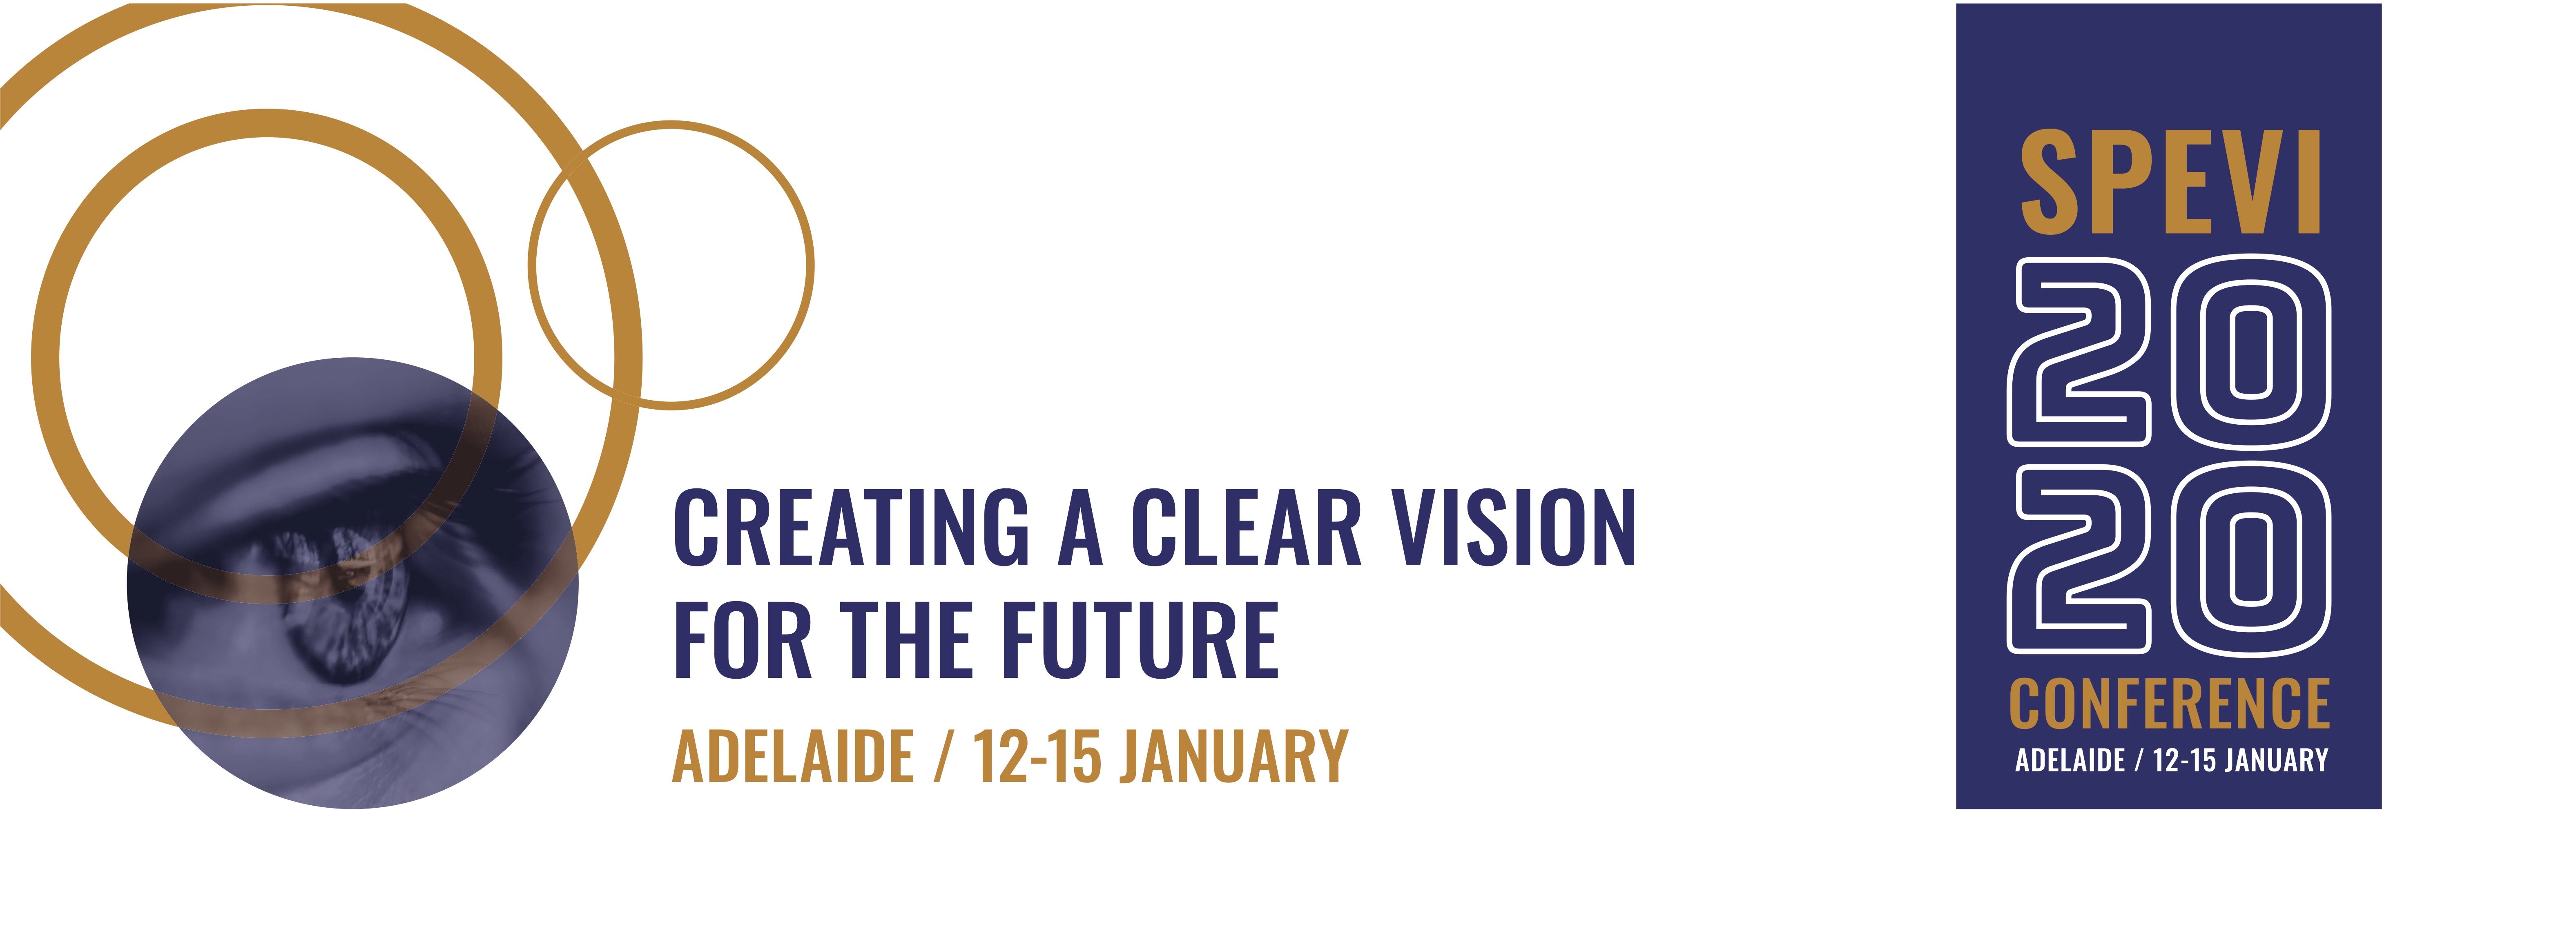 SPEVI 2020 Conference logo - 'Creating a clear vision for the future', Adelaide 12-15 January